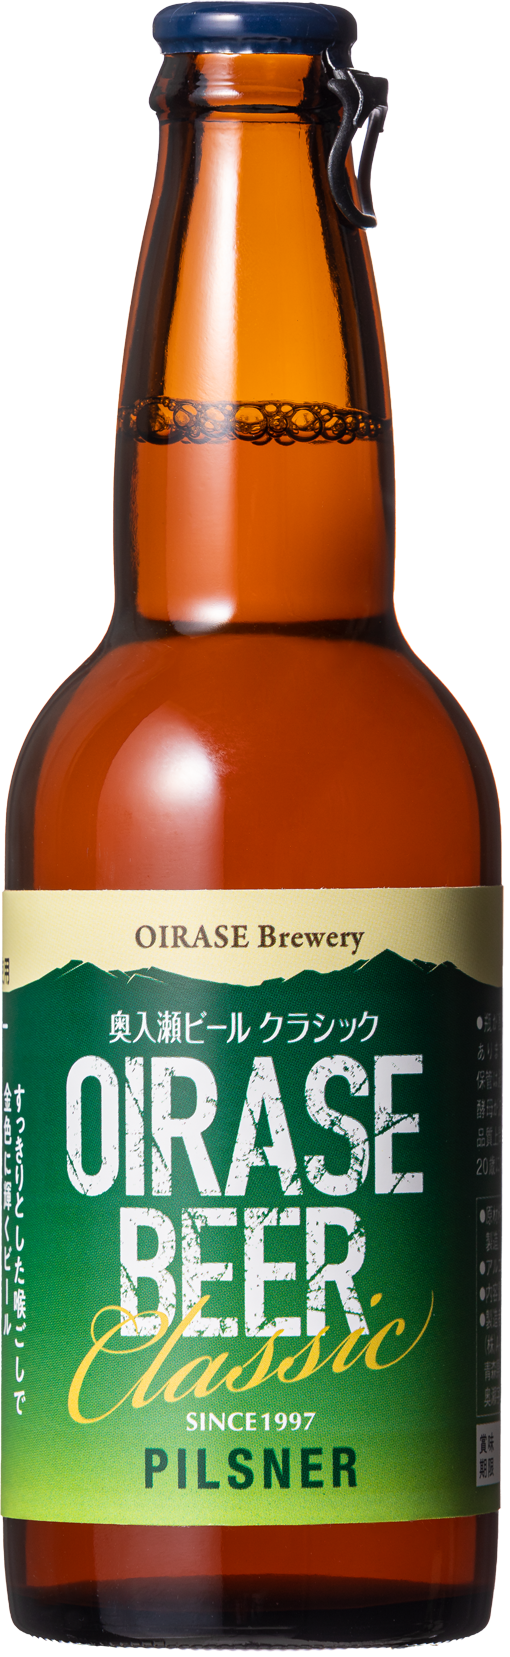 OIRASE BEER image1